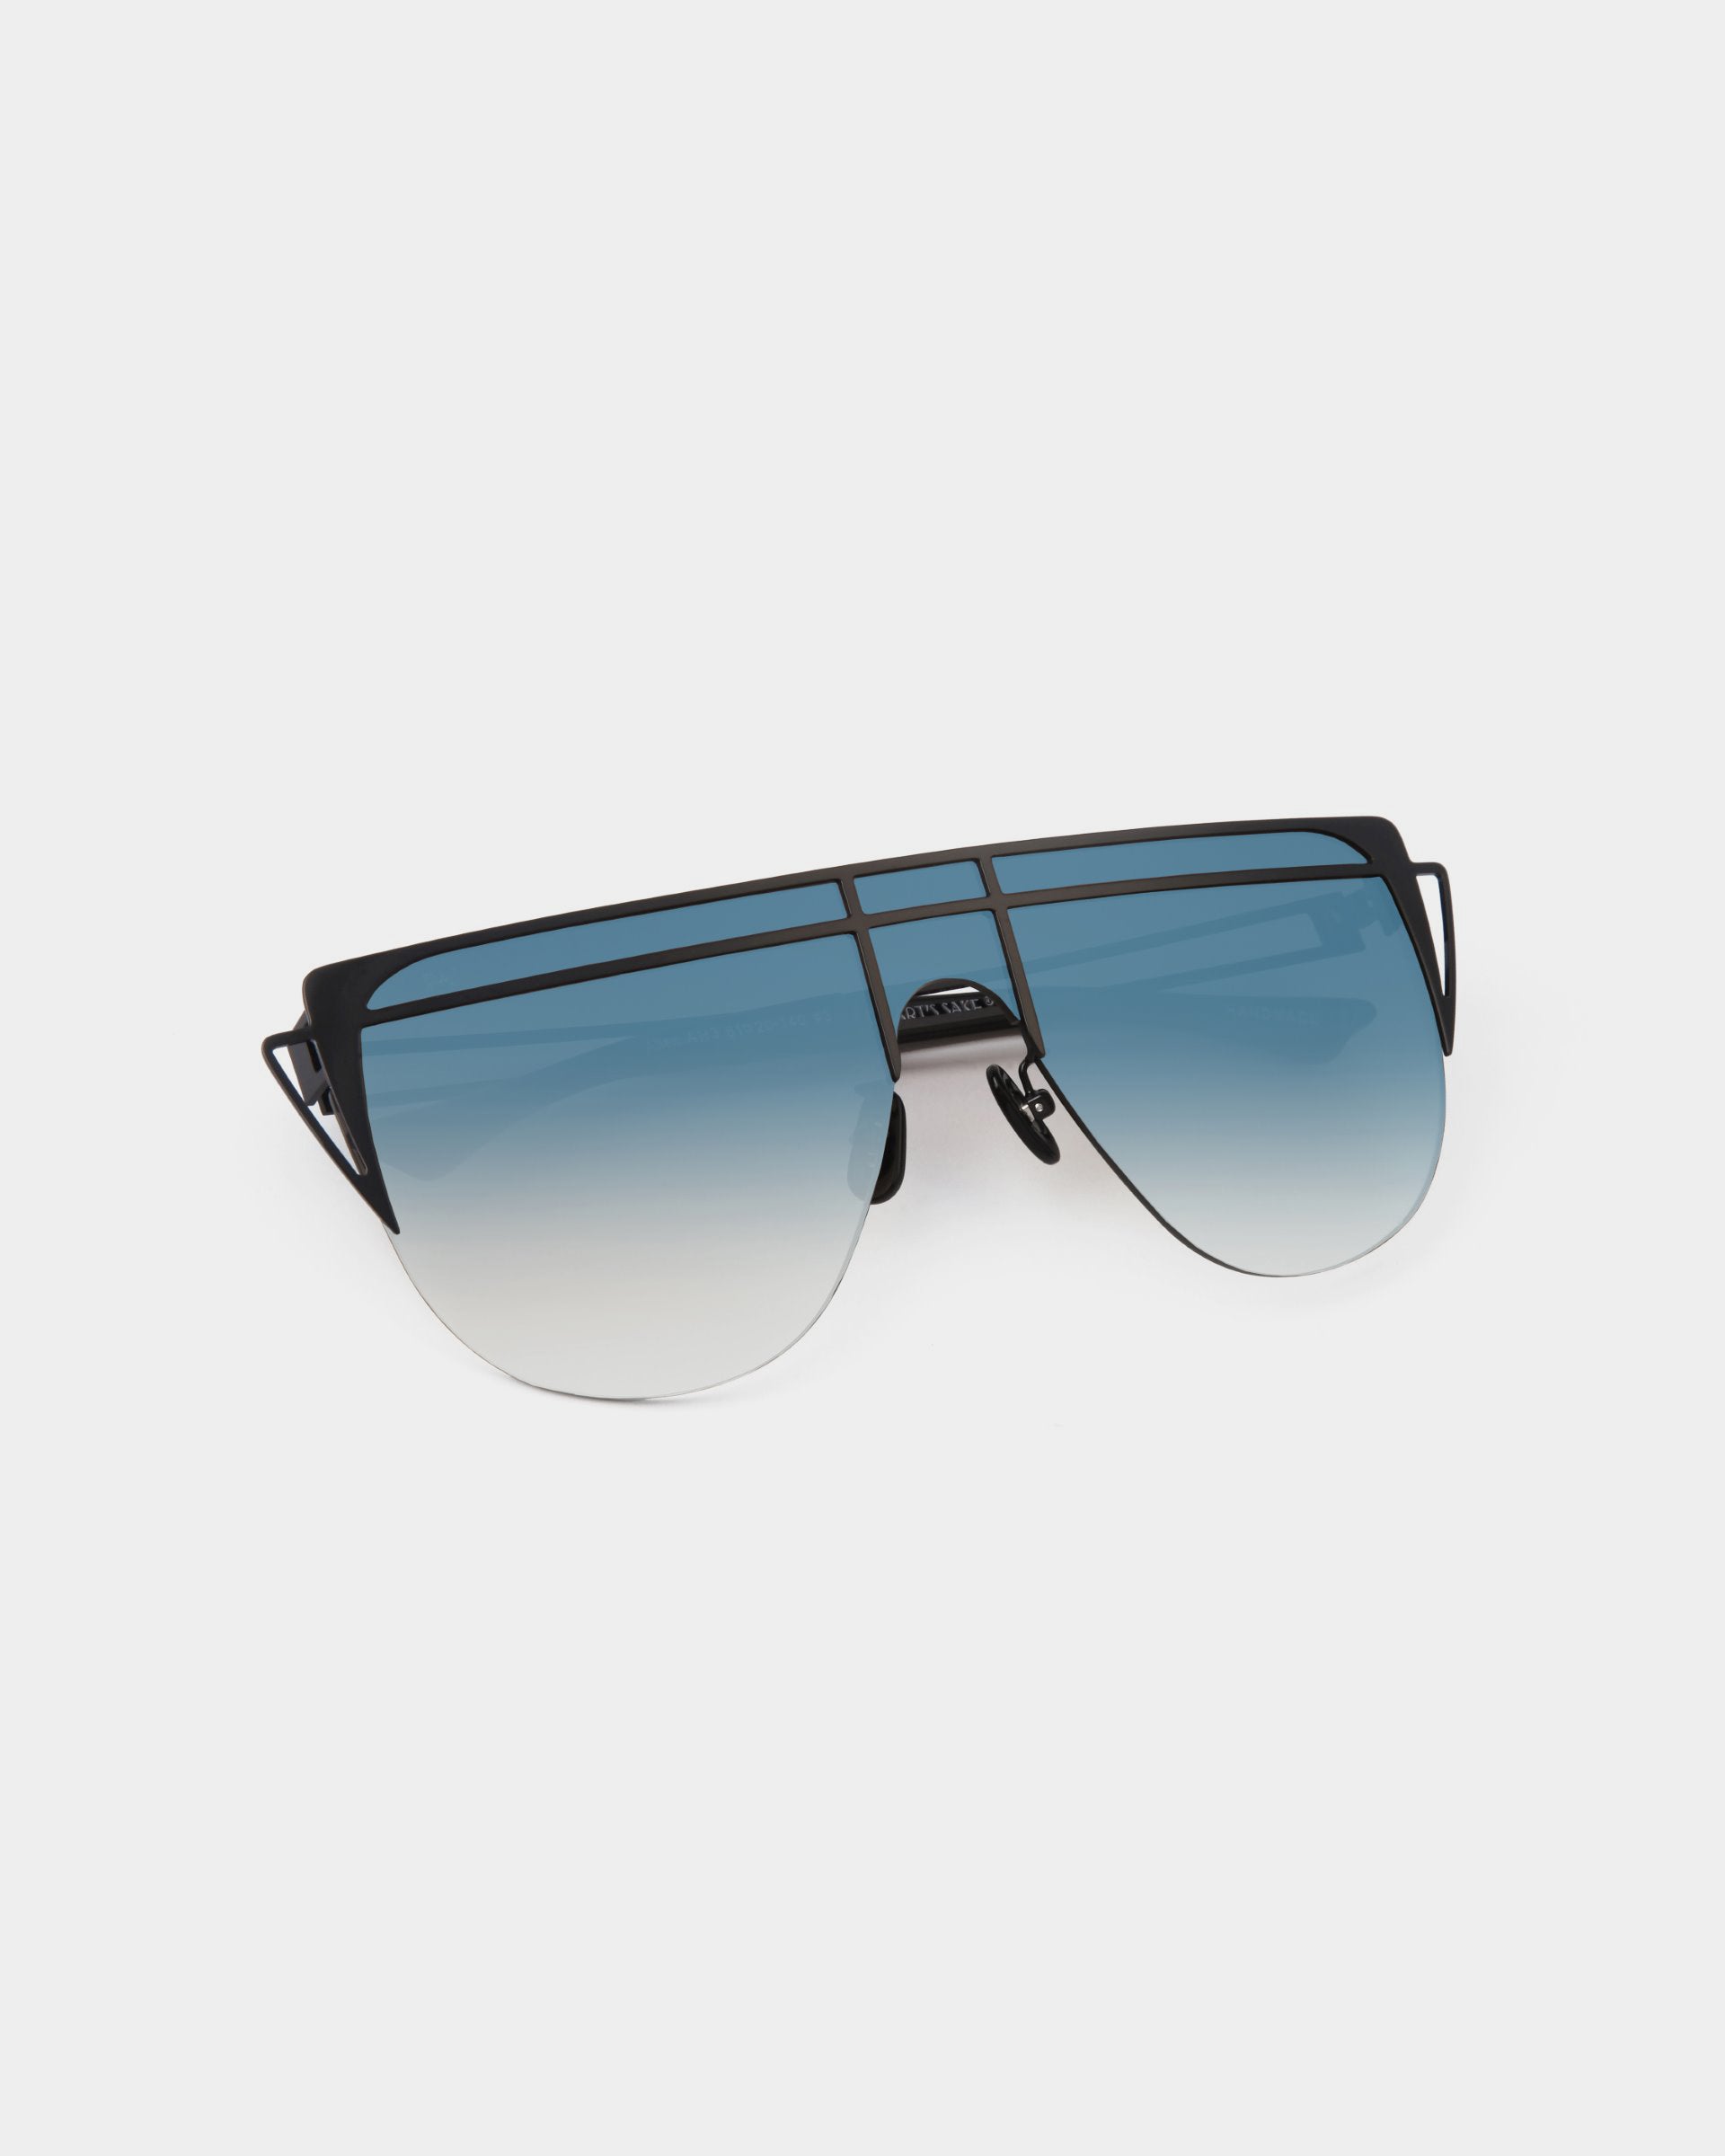 A pair of Alien sunglasses by For Art&#39;s Sake® with a black metal frame and gradient blue lenses. The design features a unique double bridge, minimal side arms, and offers UV protection, creating a modern and edgy look.